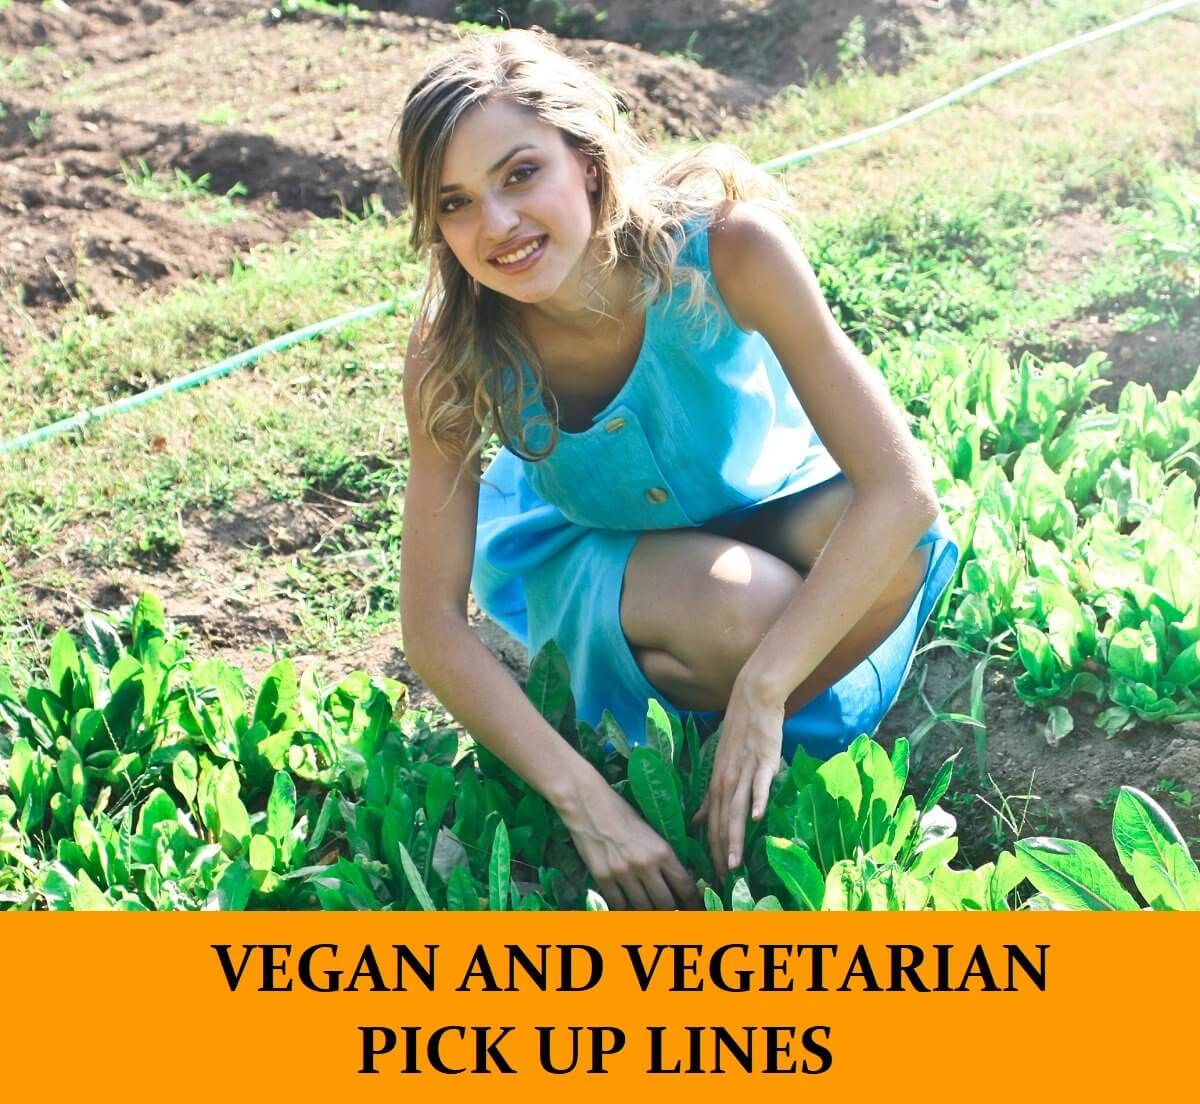 Pick Up Lines for Vegan and Vegetarian